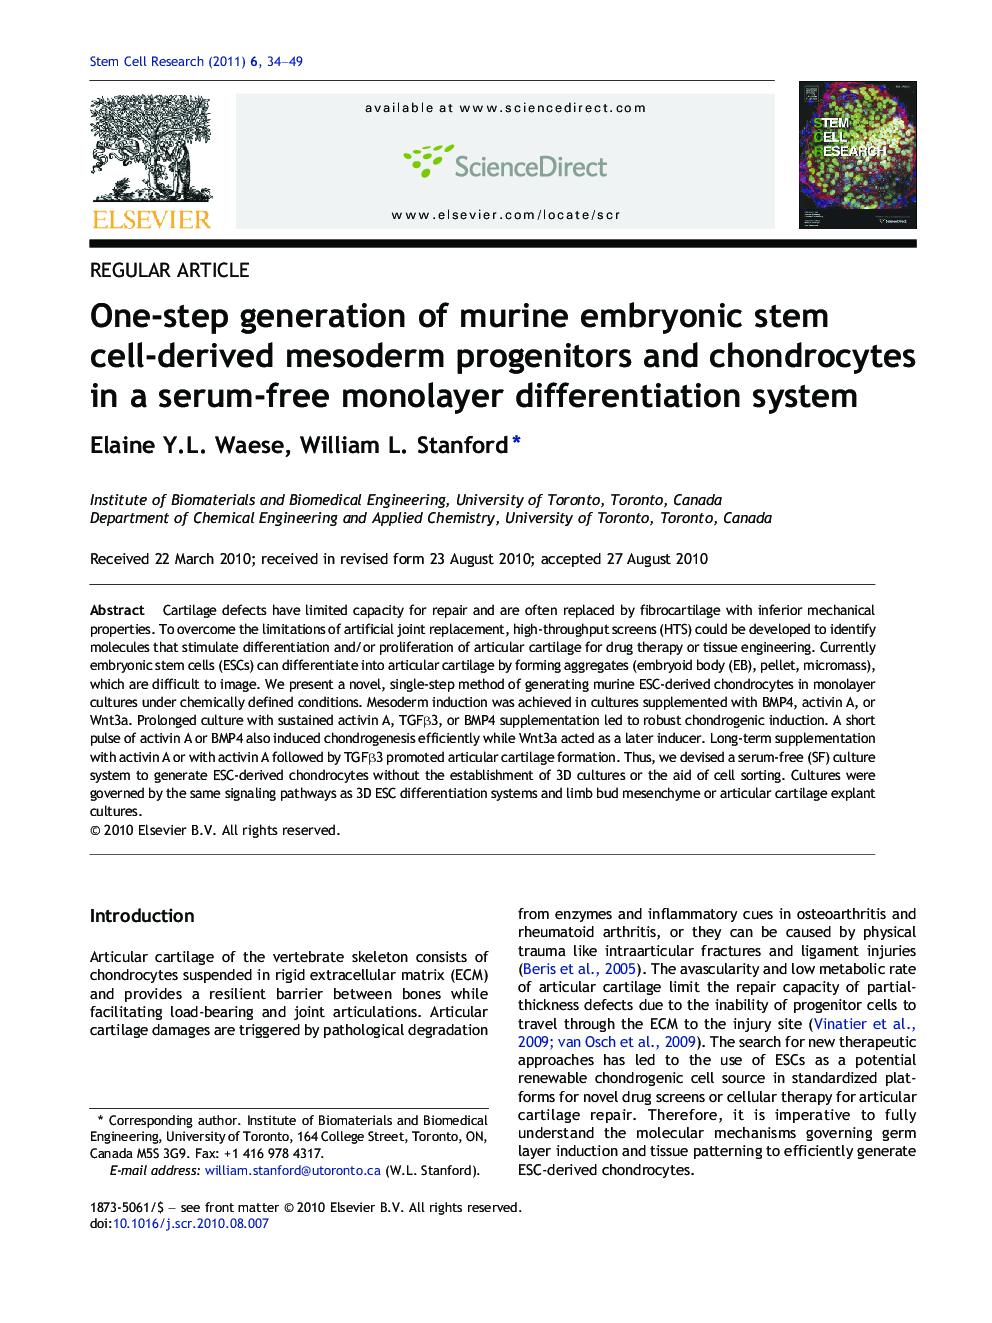 One-step generation of murine embryonic stem cell-derived mesoderm progenitors and chondrocytes in a serum-free monolayer differentiation system